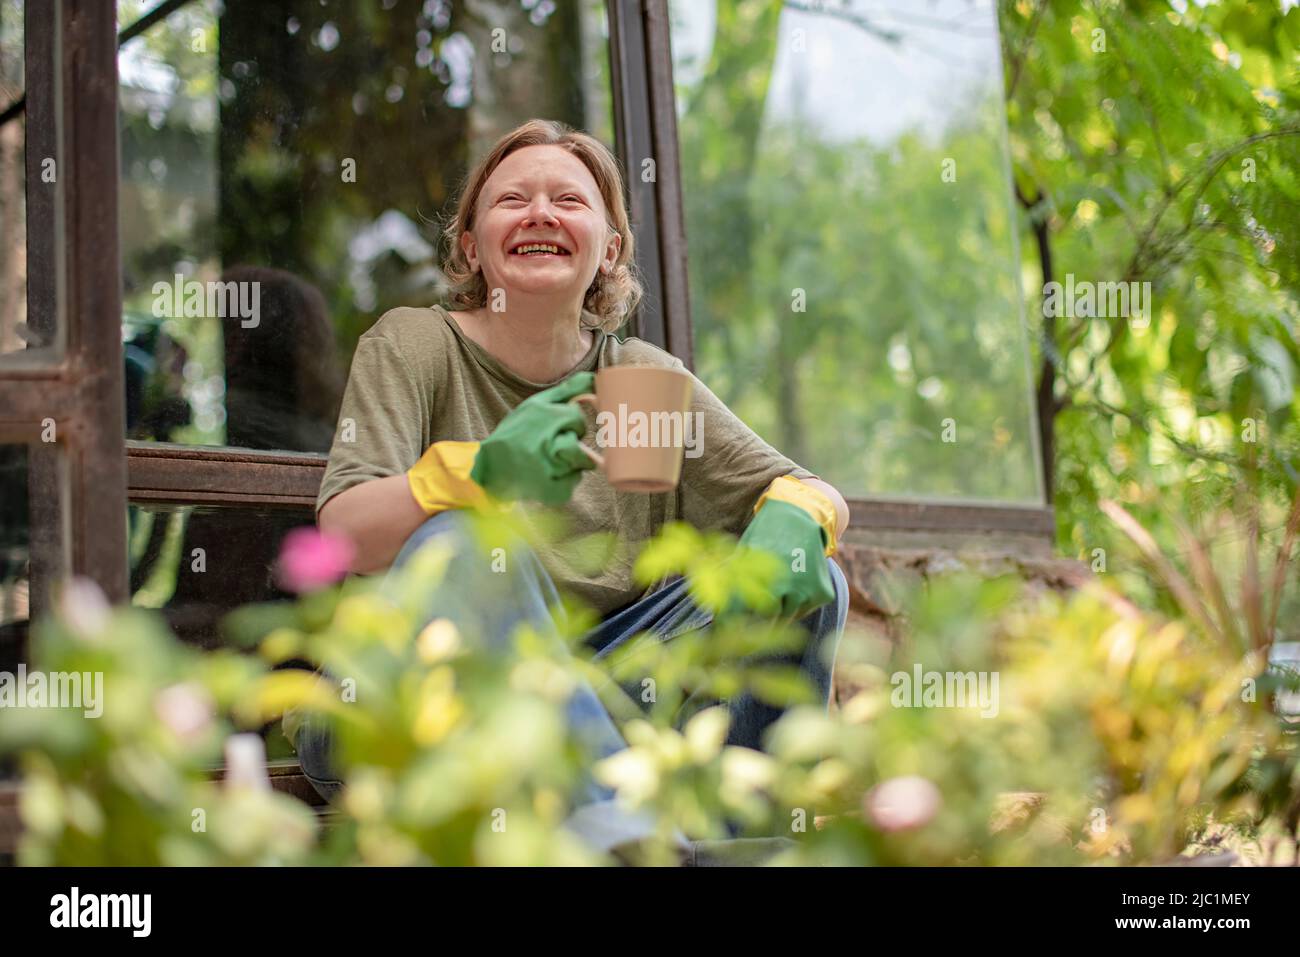 Low angle view of a mature woman drinking cup of tea while gardening Stock Photo